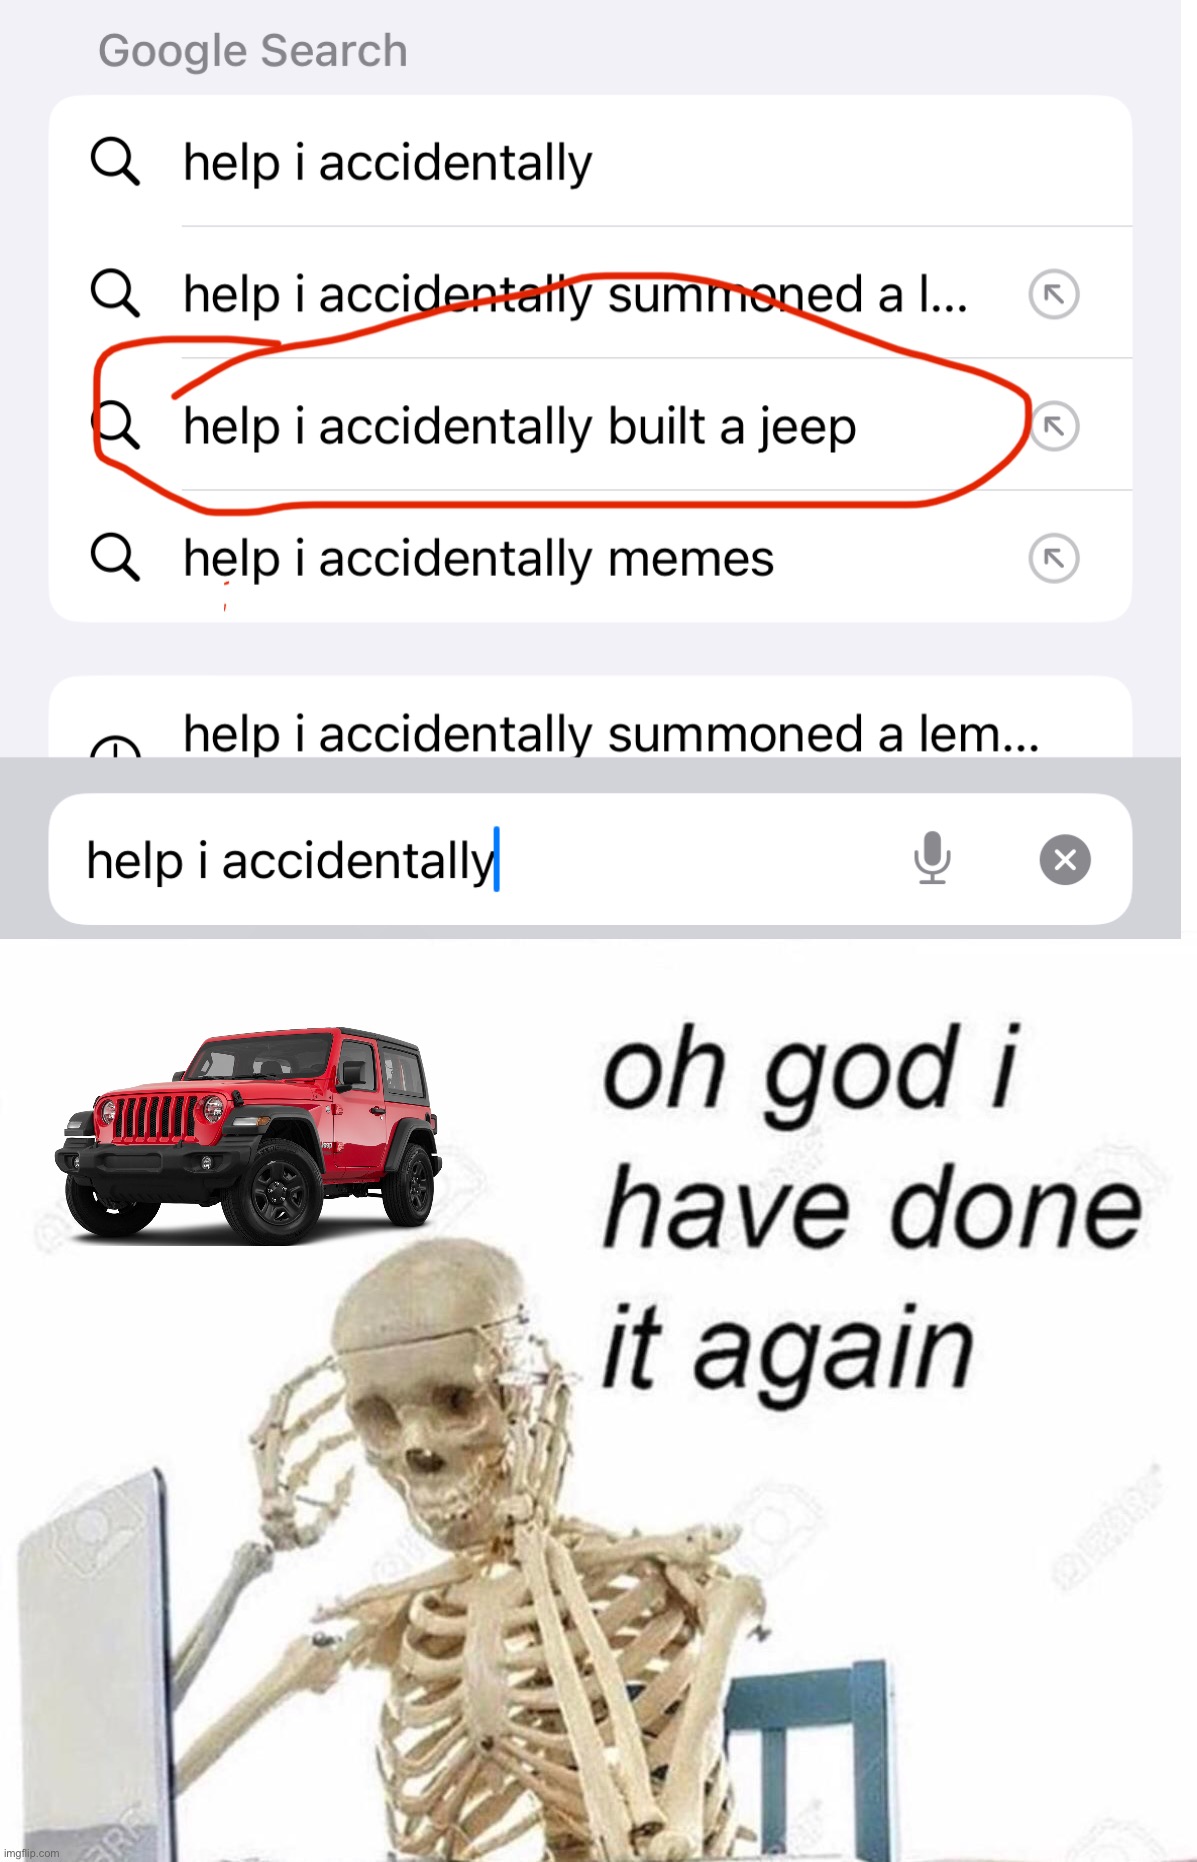 Man… again? | image tagged in oh god i have done it again,jeep,help i accidentally | made w/ Imgflip meme maker